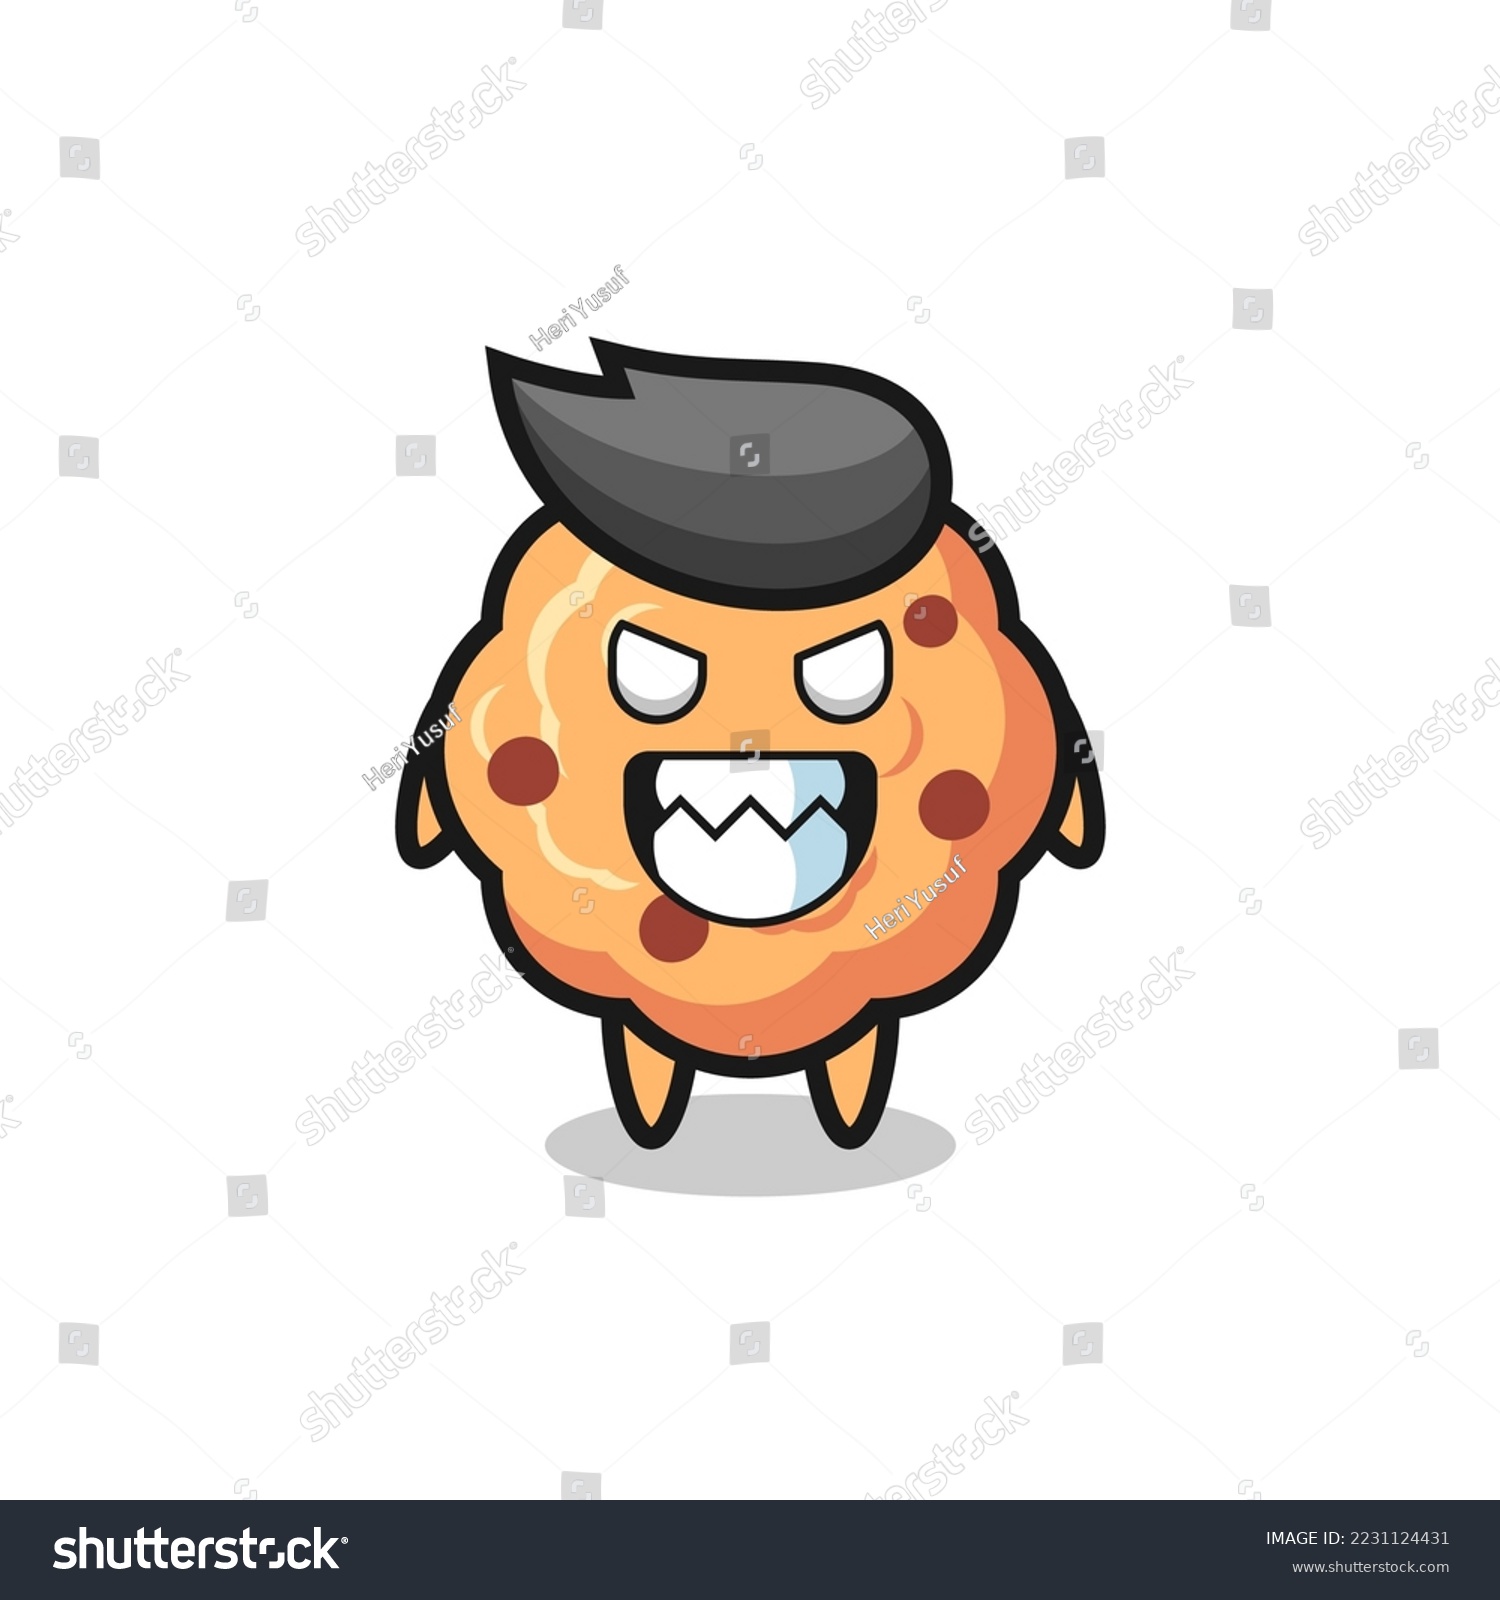 SVG of evil expression of the chocolate chip cookie cute mascot character , cute style design for t shirt, sticker, logo element svg